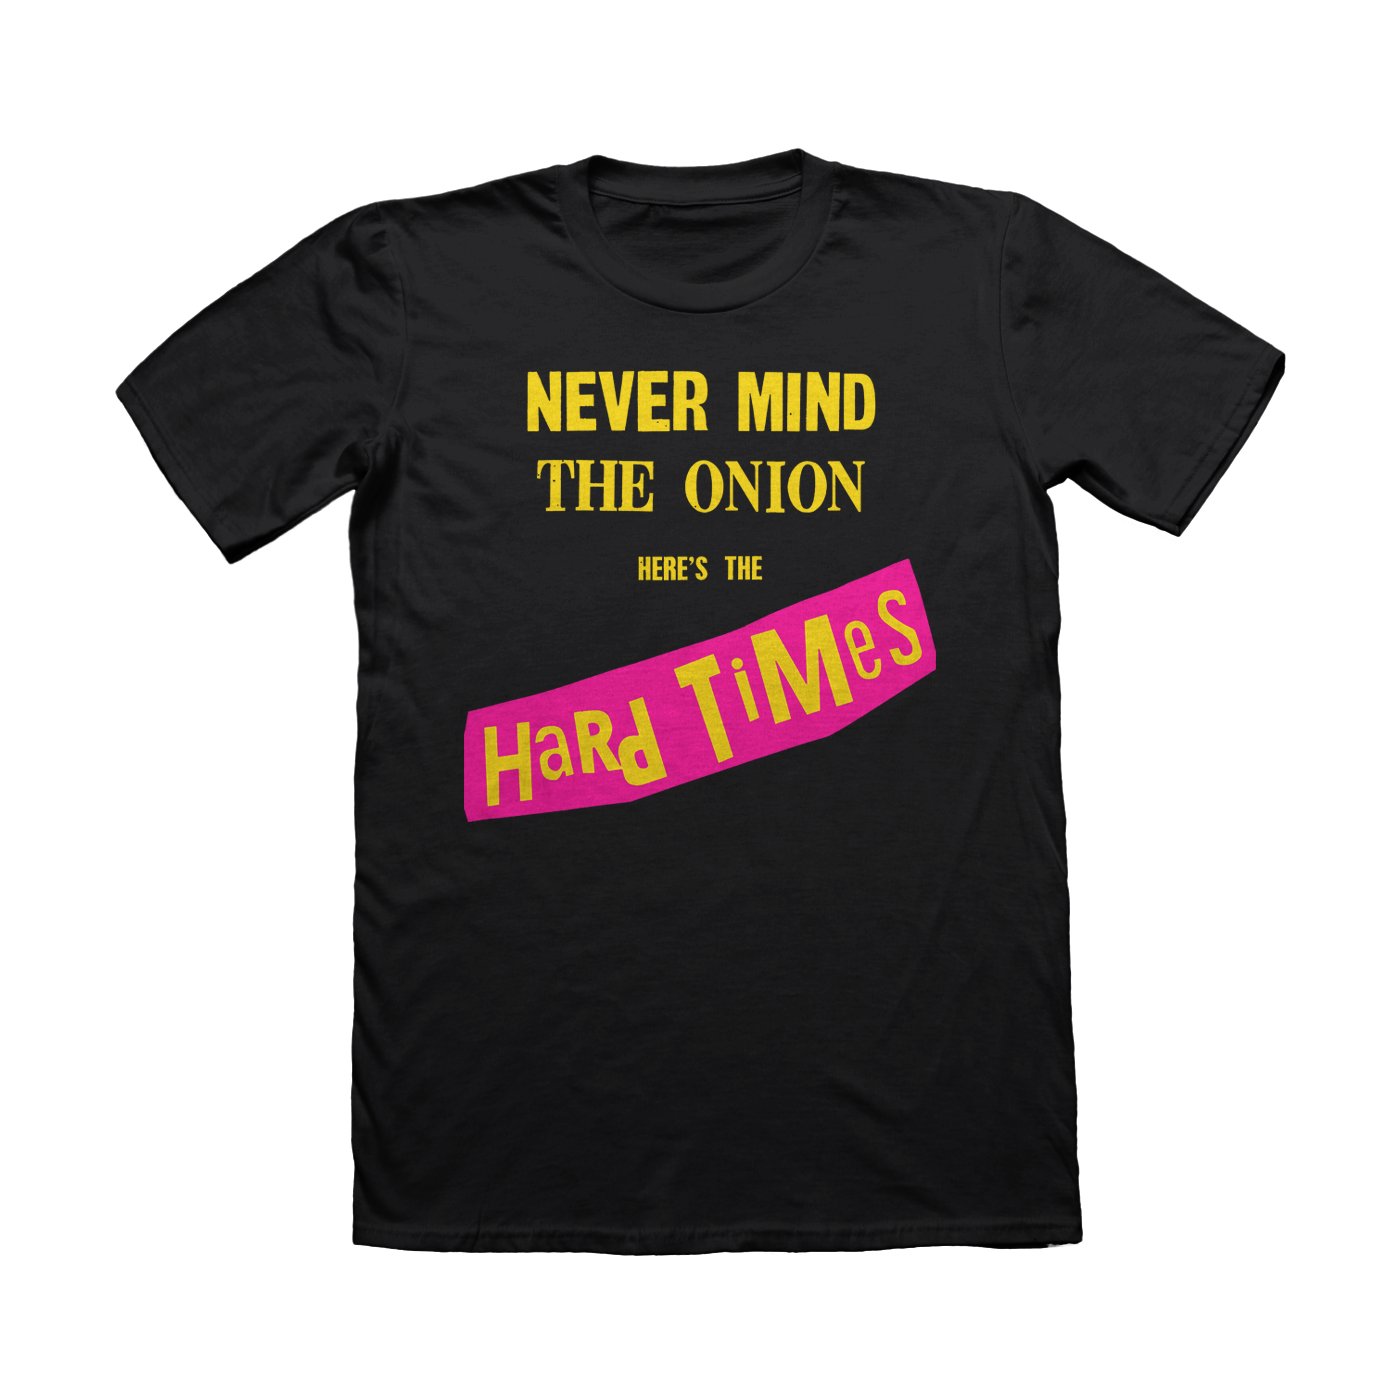 "Nevermind The Onion, Here's The Hard Times" Tee